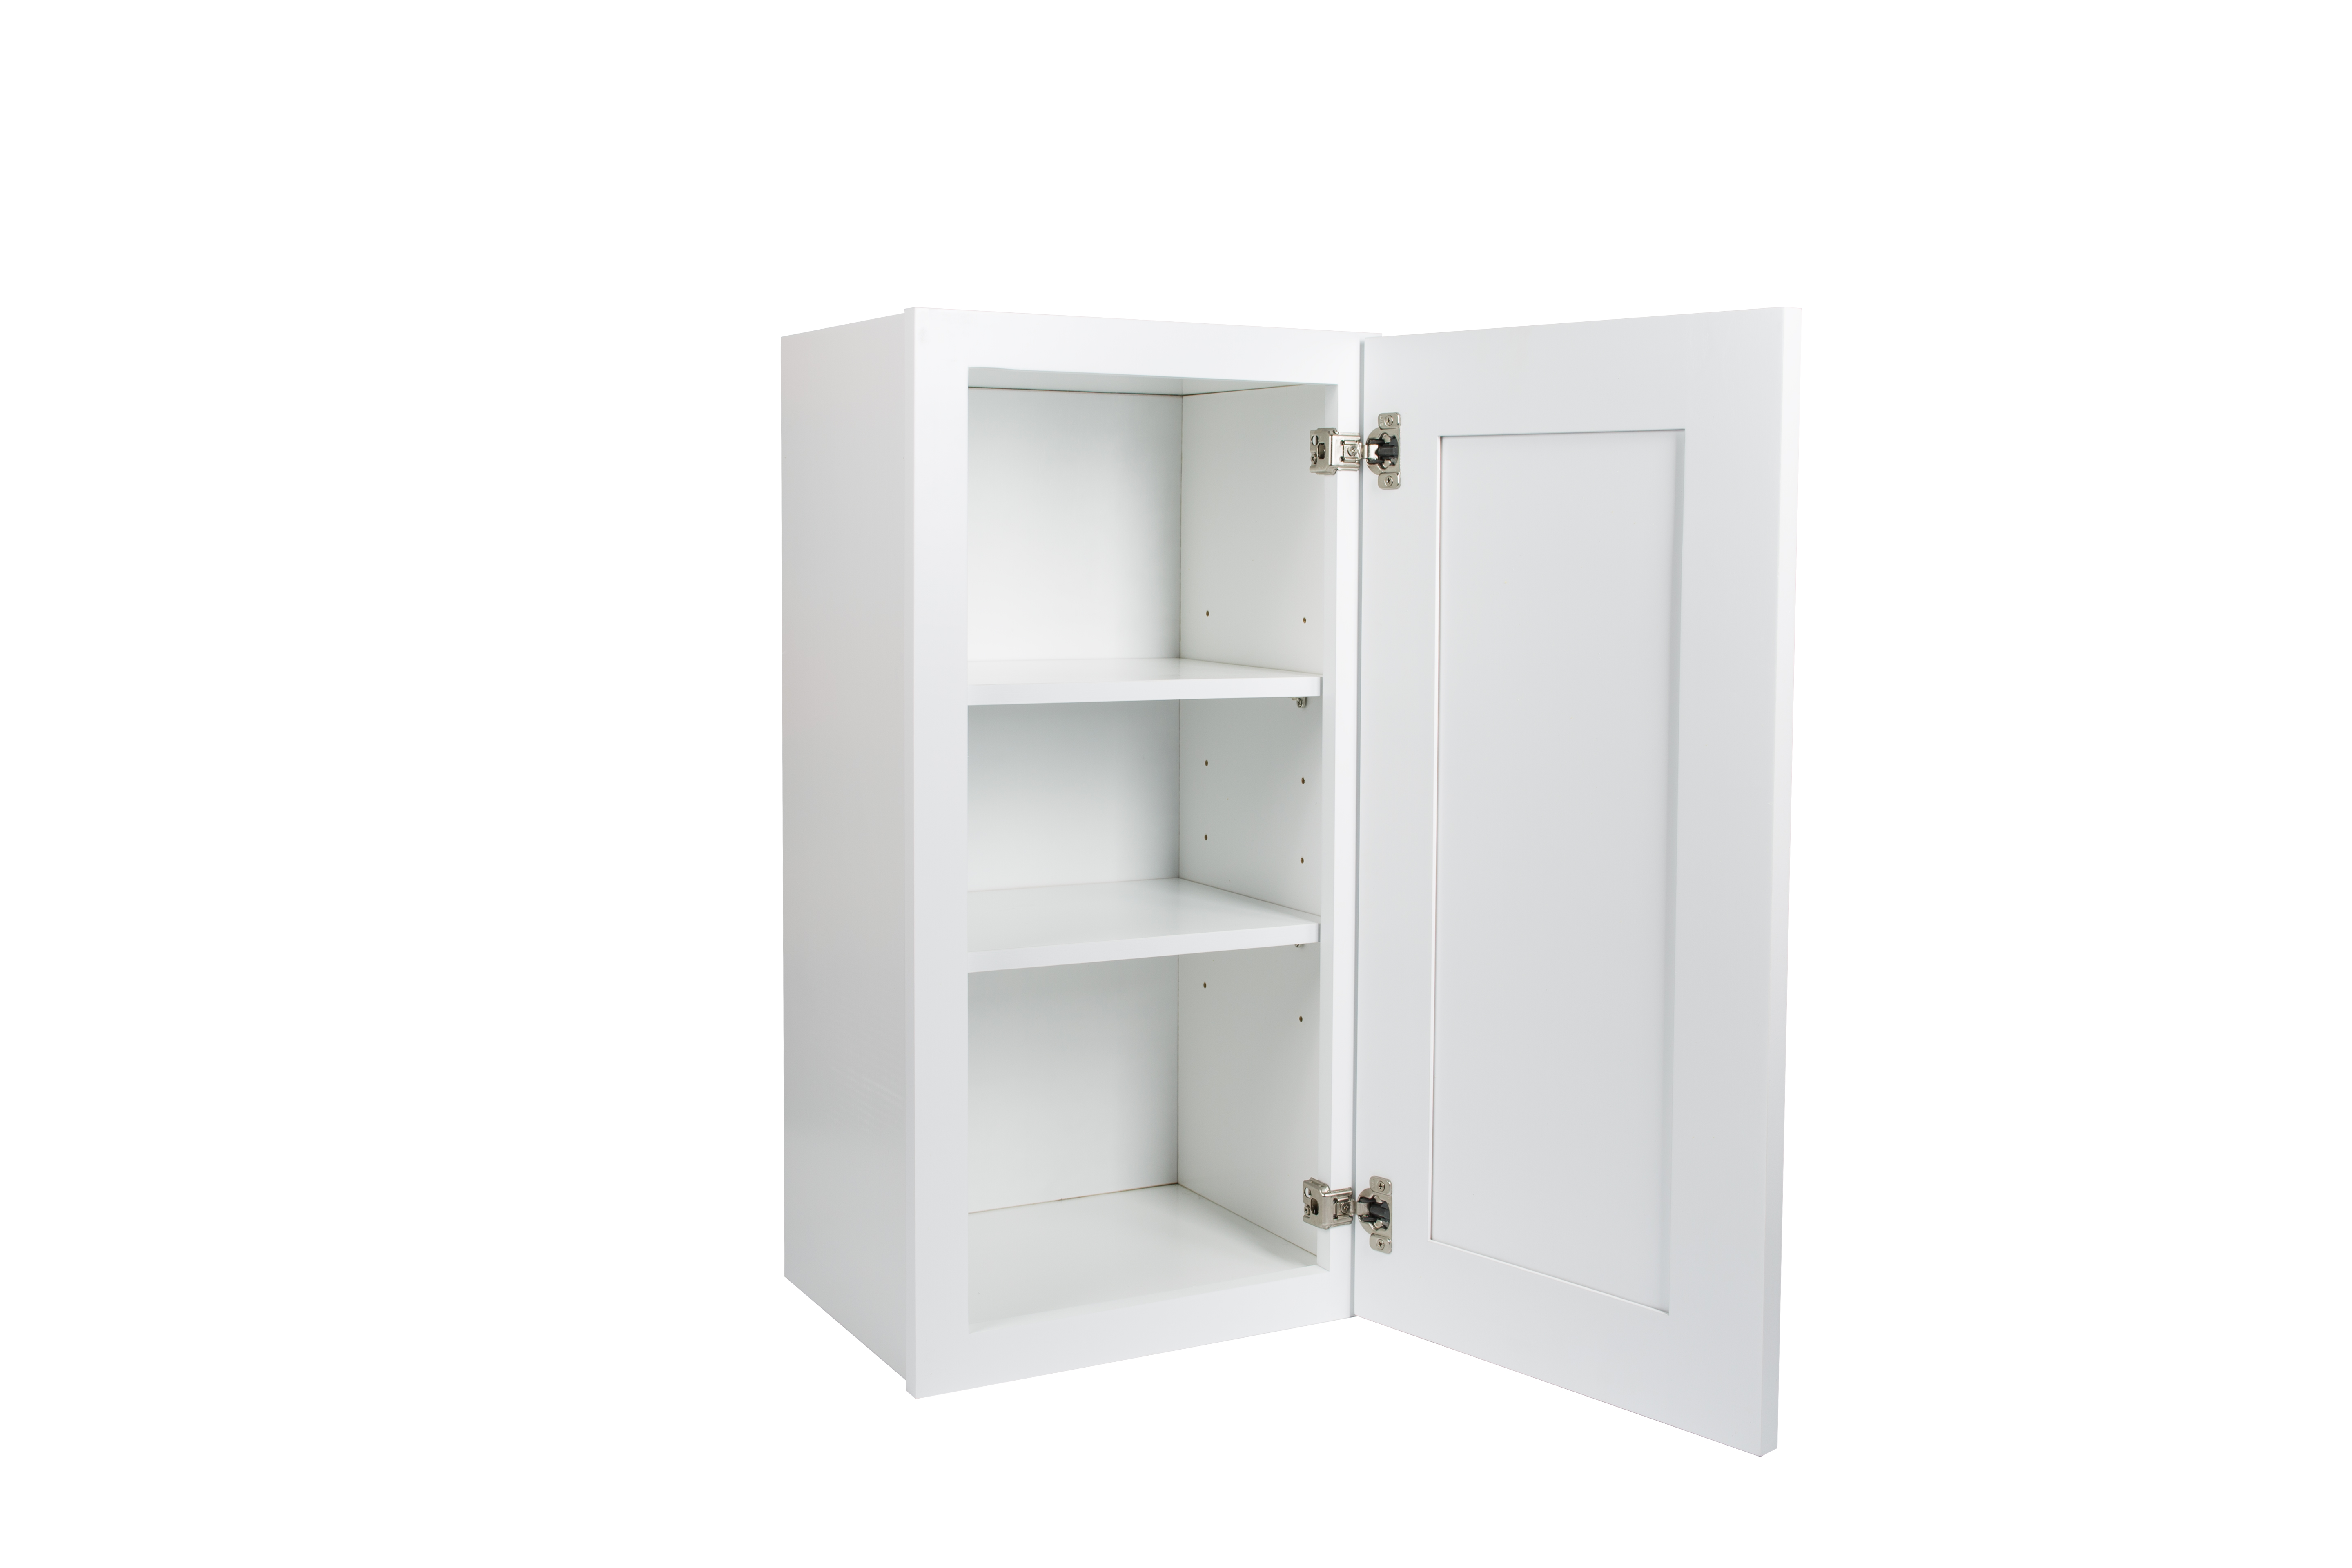 Ready to Assemble 21x36x12 in. Shaker Wall Cabinet with 1-Door and Adjustable Shelves in White